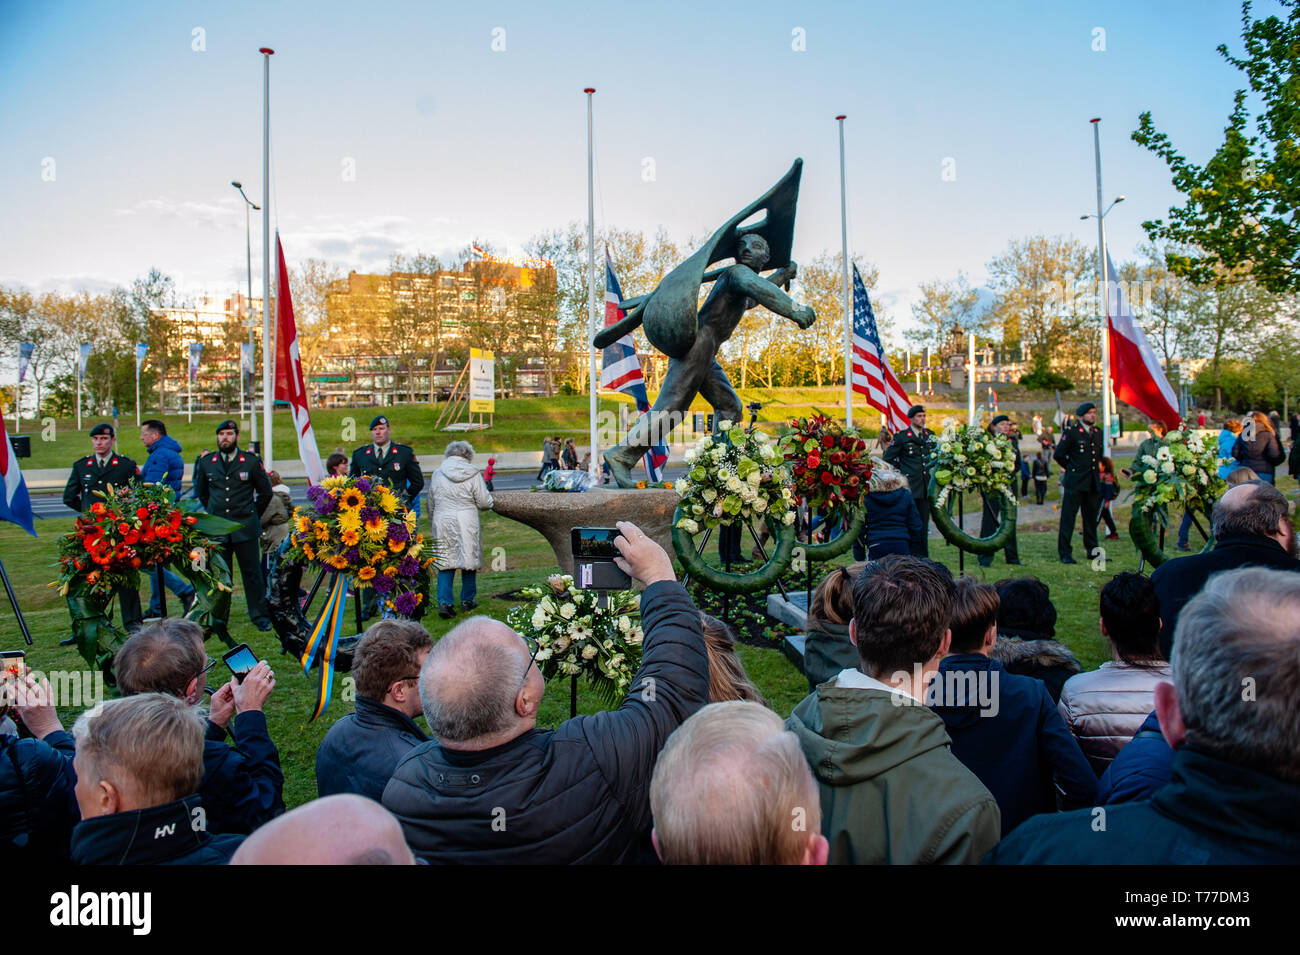 Nijmegen, Gelderland, Netherlands. 4th May, 2019. People seen taking photos of the crowns of flowers left at the monument during the event.Remembrance day celebrations of the victims of WWII in Nijmegen was held with several ceremonies, including: unveiling a plaque with an honorary list of the fallen soldiers of WWII on Plein 1944 square, After that, the commemorations took place at the ''Kitty de Wijze''. Credit: ZUMA Press, Inc./Alamy Live News Stock Photo